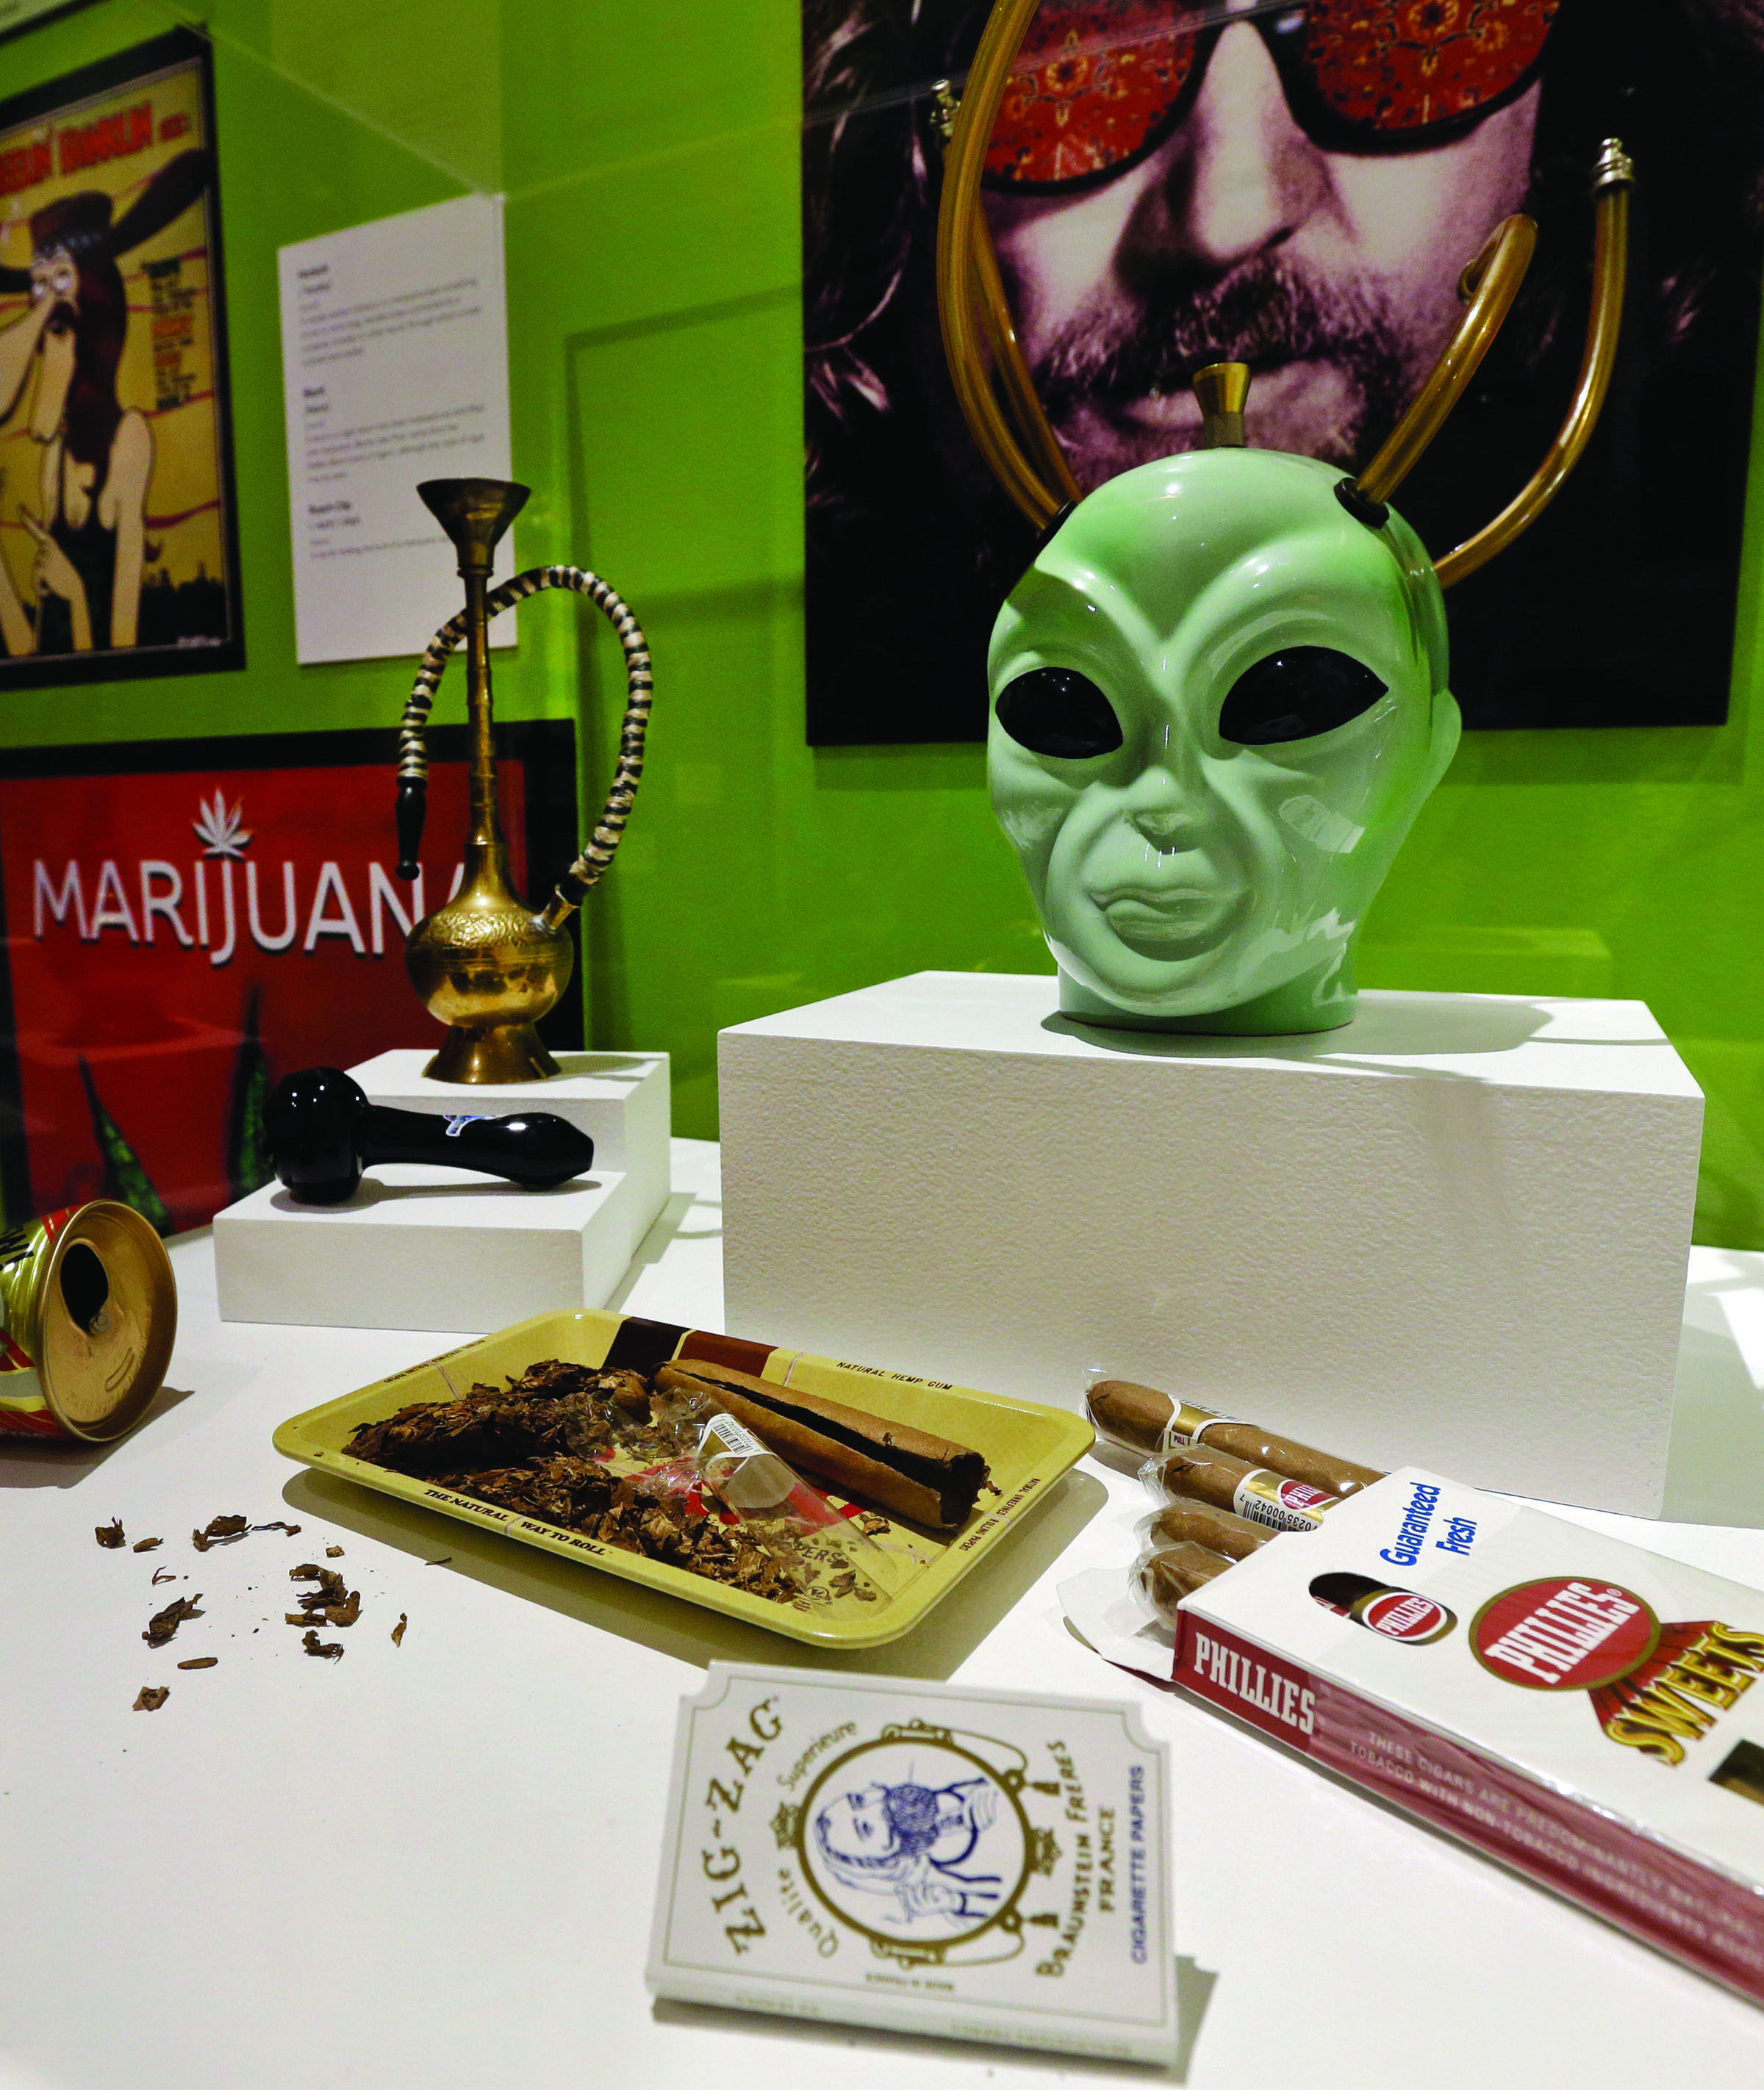 Marijuana smoking paraphernalia sits on display May 26 as part of the “Altered State: Marijuana in California” exhibit at the Oakland Museum of California in Oakland